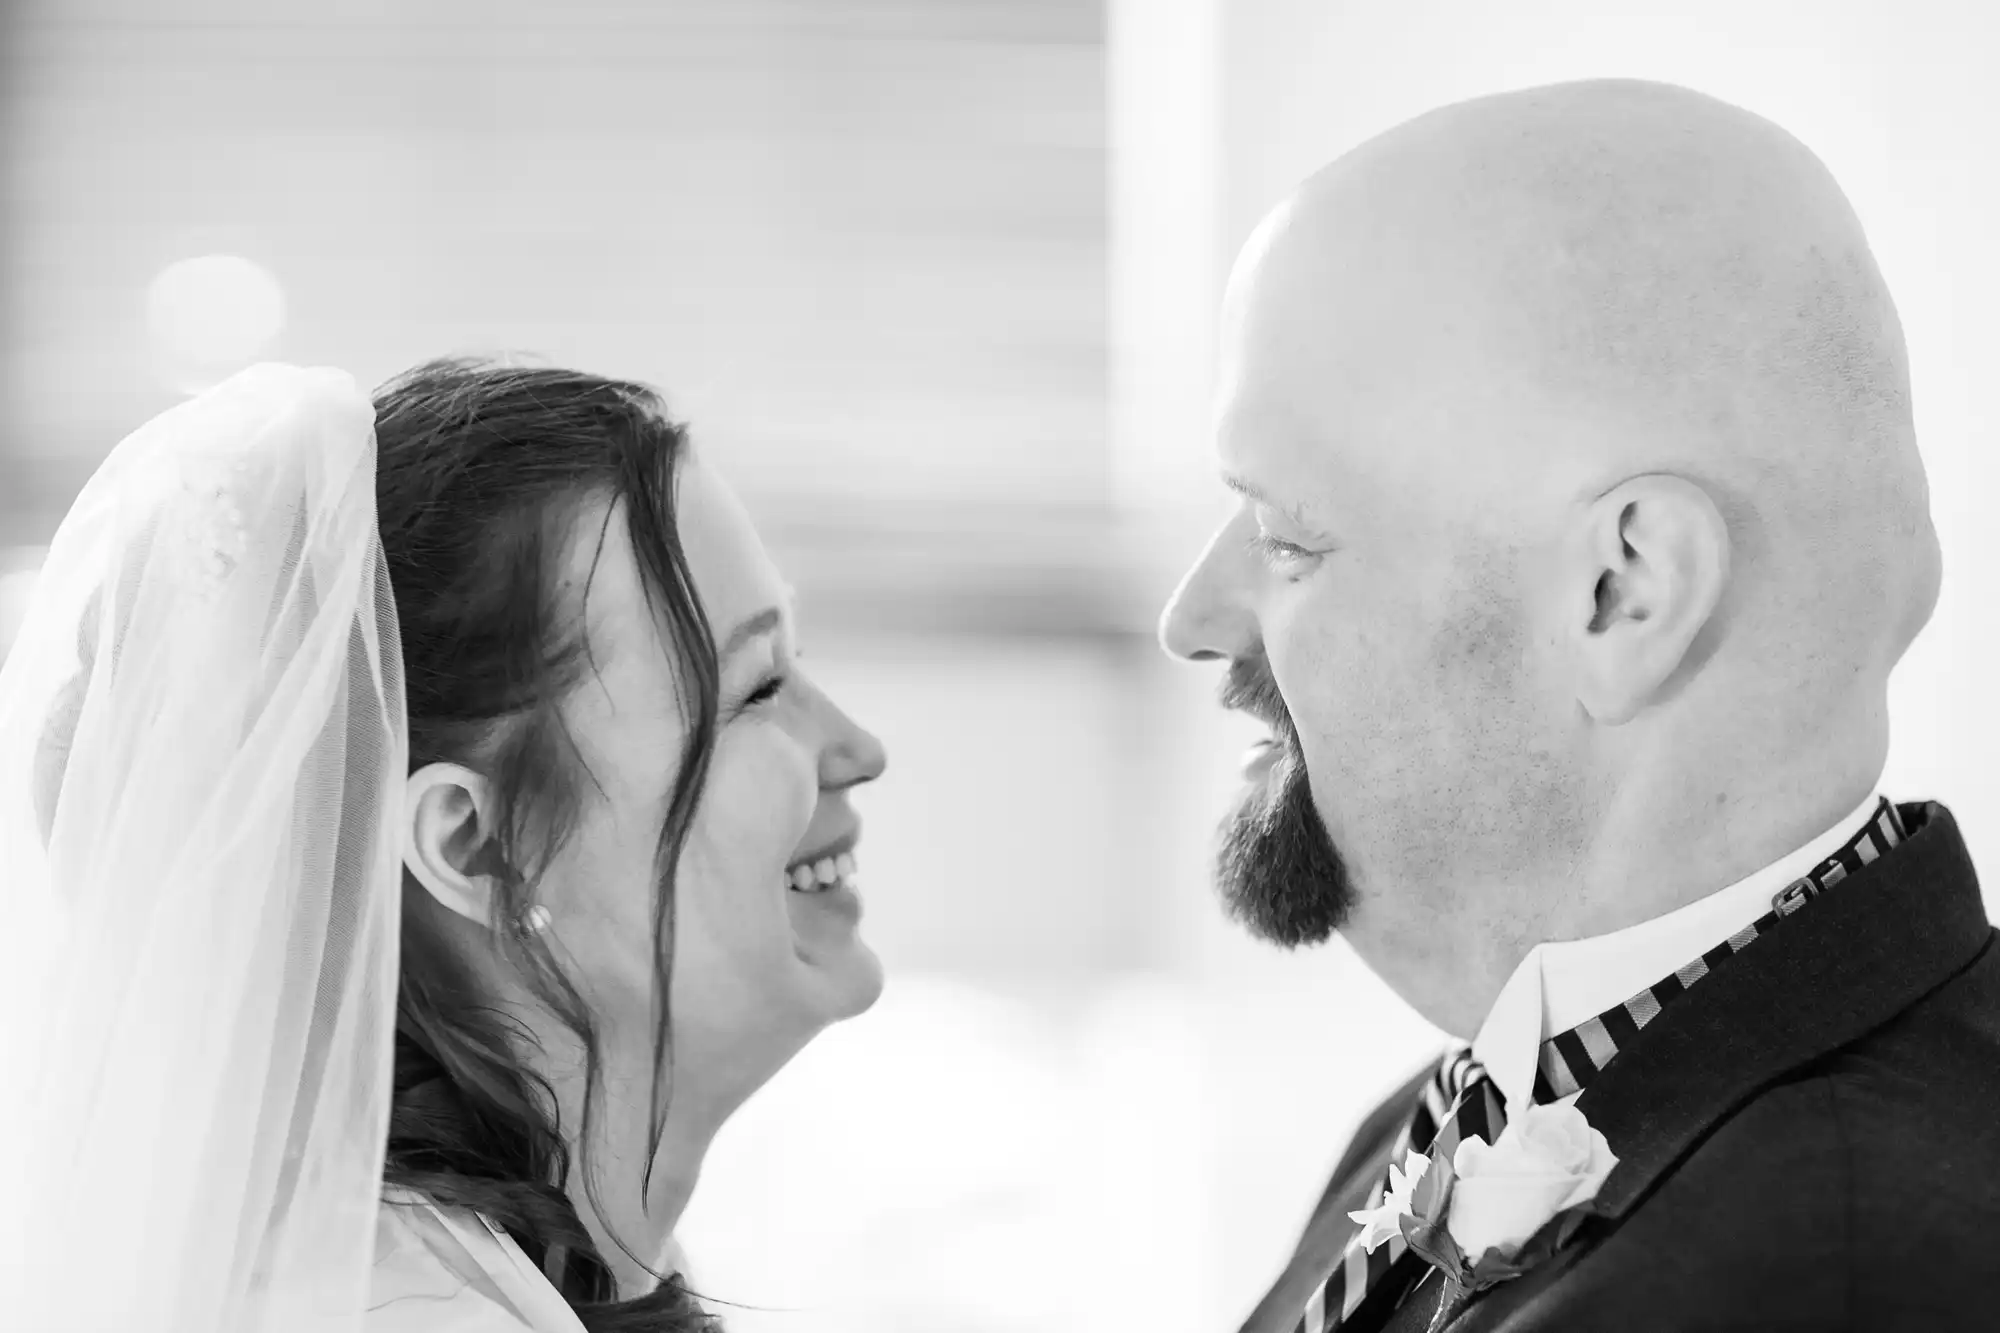 A bride and groom smiling at each other, both in wedding attire, captured in a close-up black and white photograph.